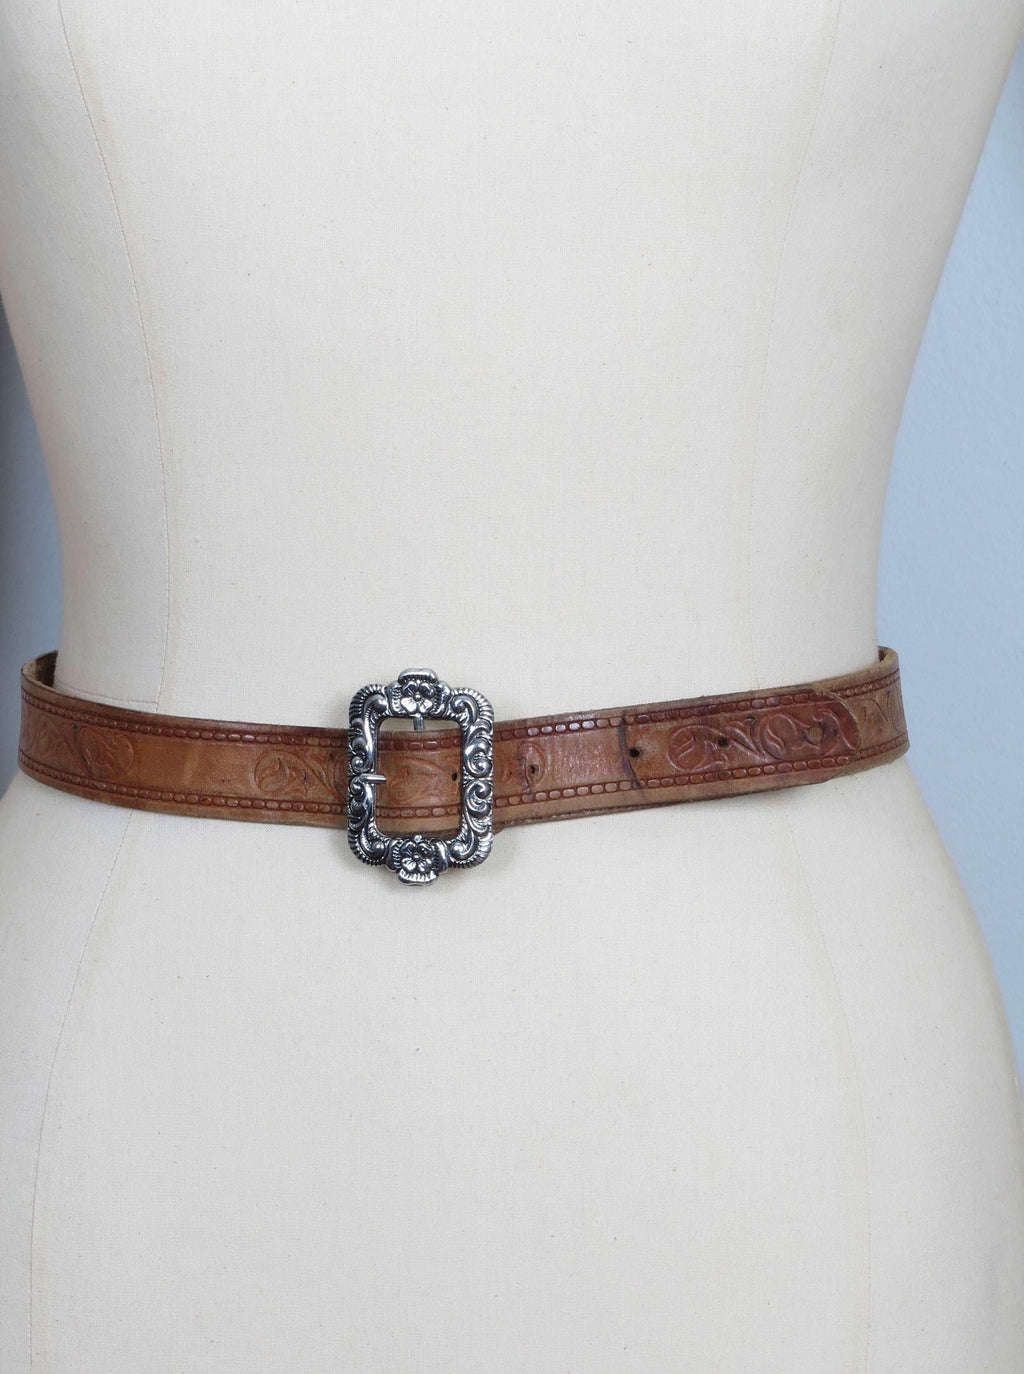 1970s Tan Leather Belt - The Harlequin